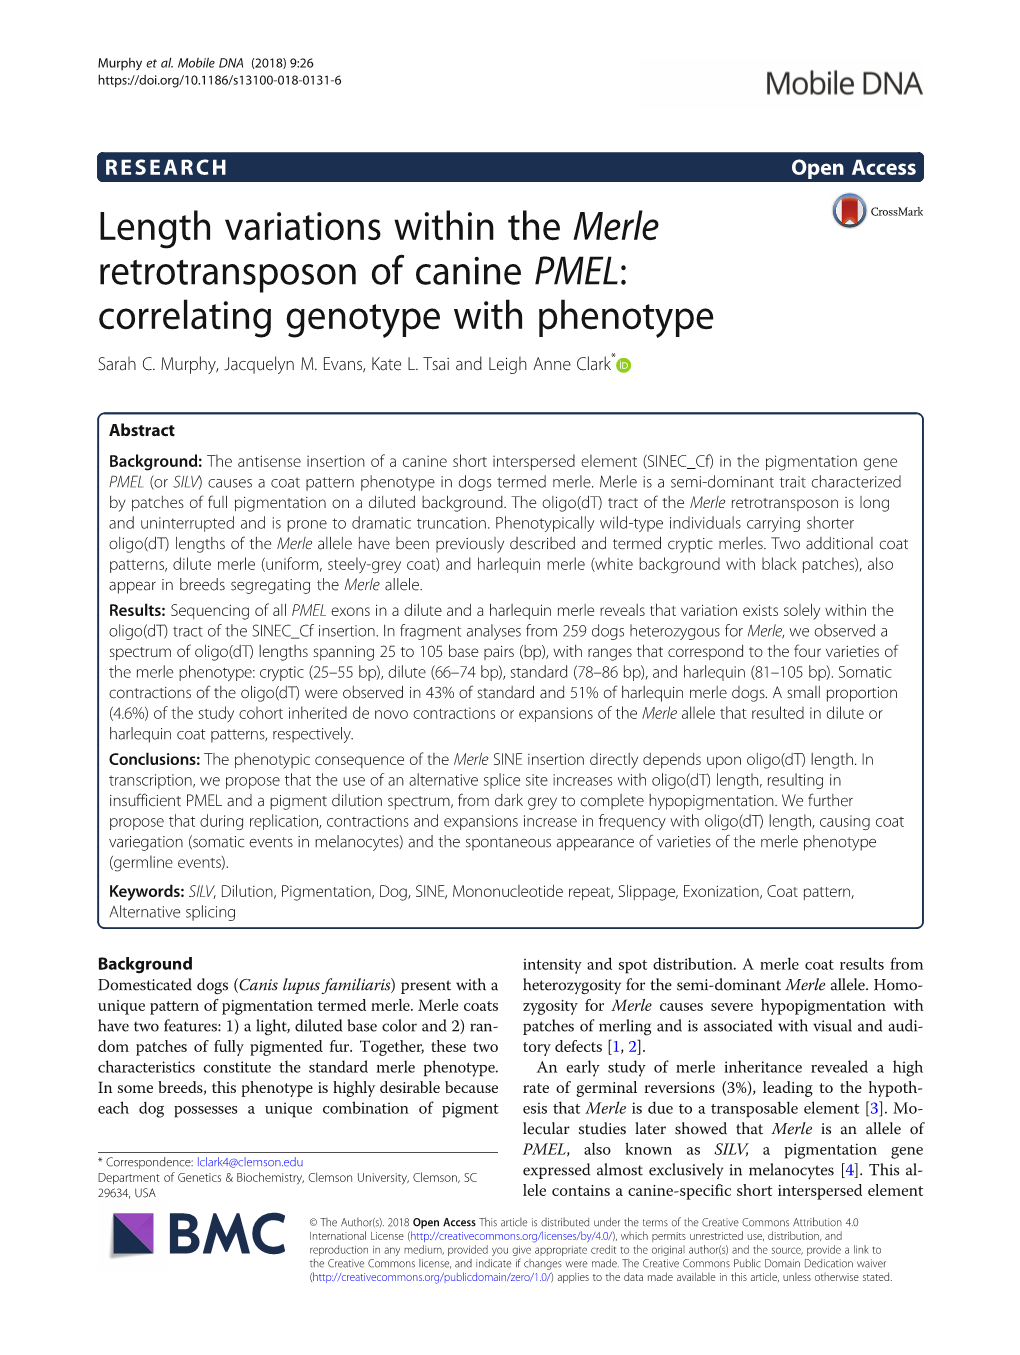 Length Variations Within the Merle Retrotransposon of Canine PMEL: Correlating Genotype with Phenotype Sarah C